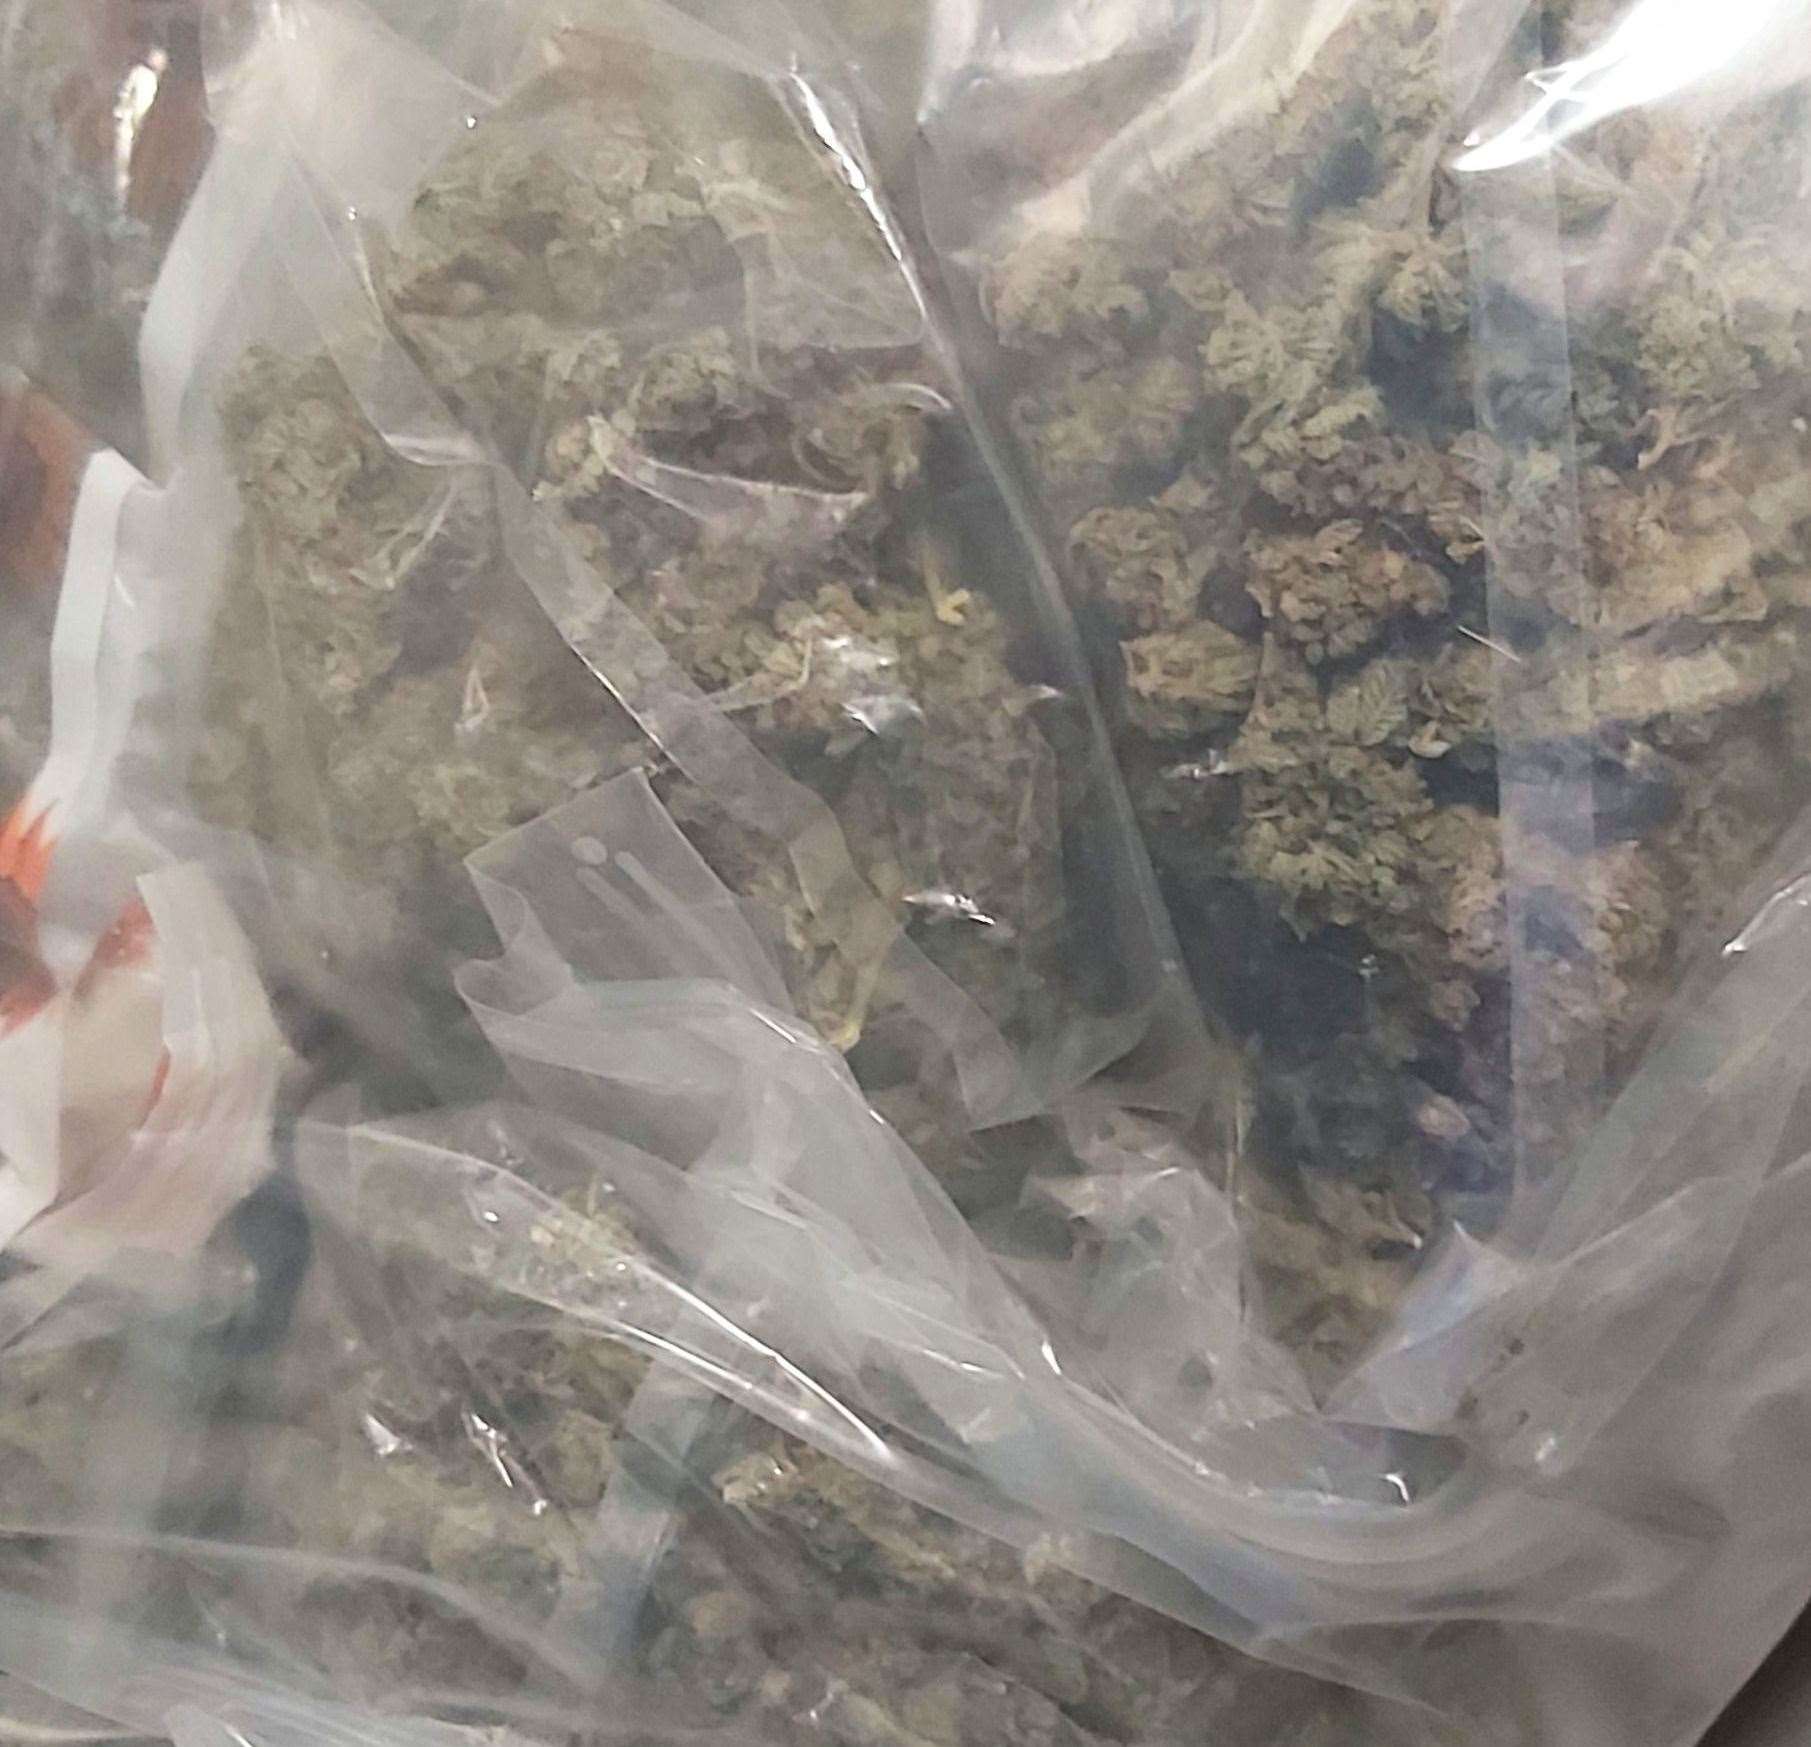 Cannabis cultivation and plants were seized